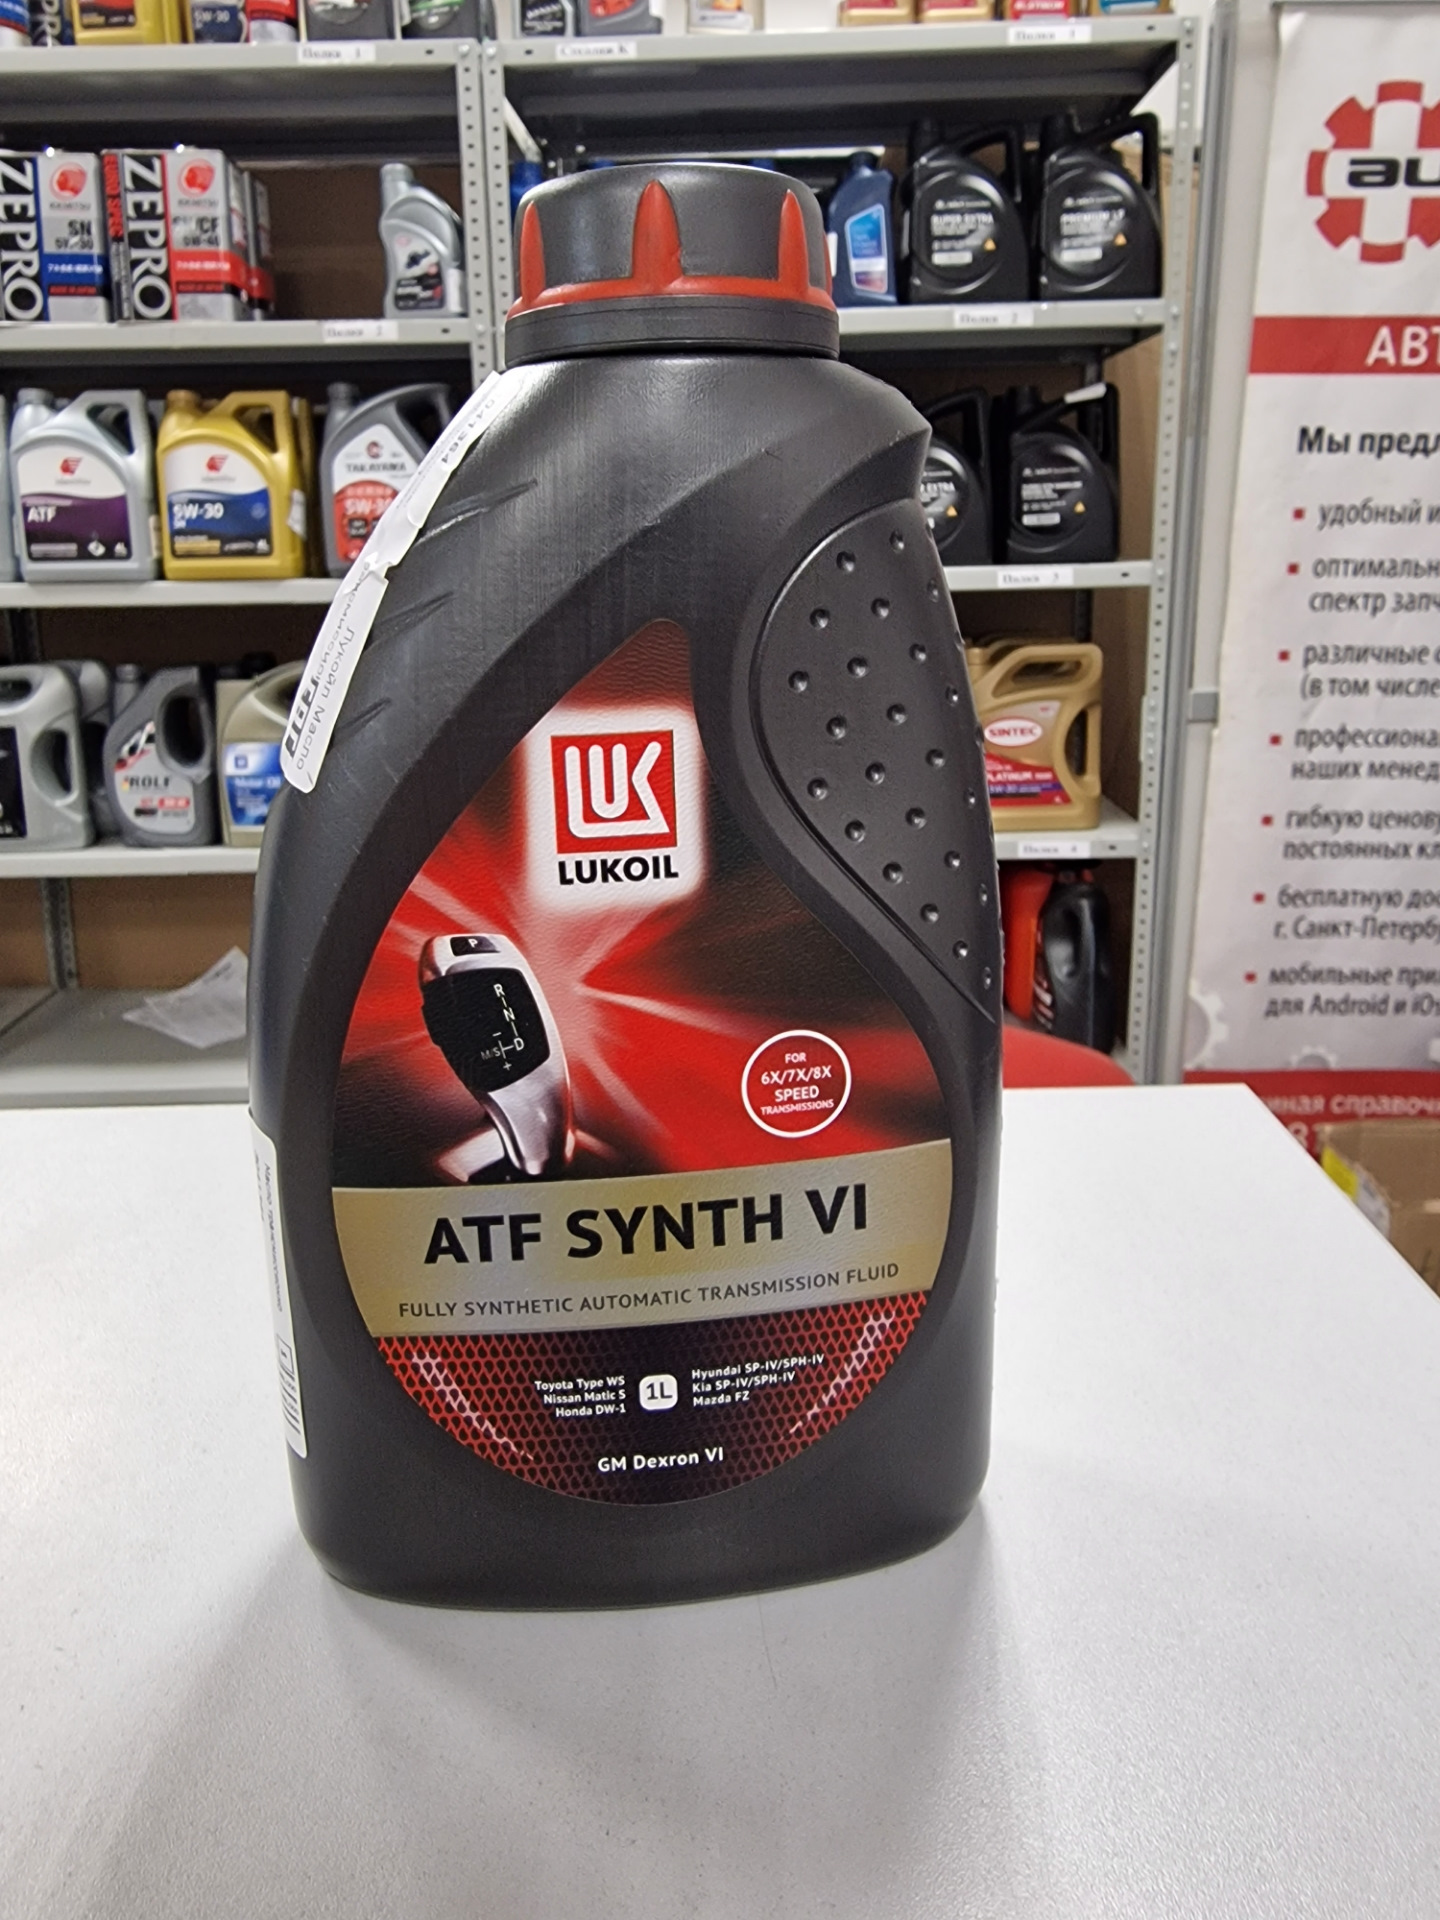 ATF SP-IV Lukoil. Lukoil ATF Synth vi. Лукойл ATF Synth lv. ZIC ATF Synth vi. Лукойл synth vi